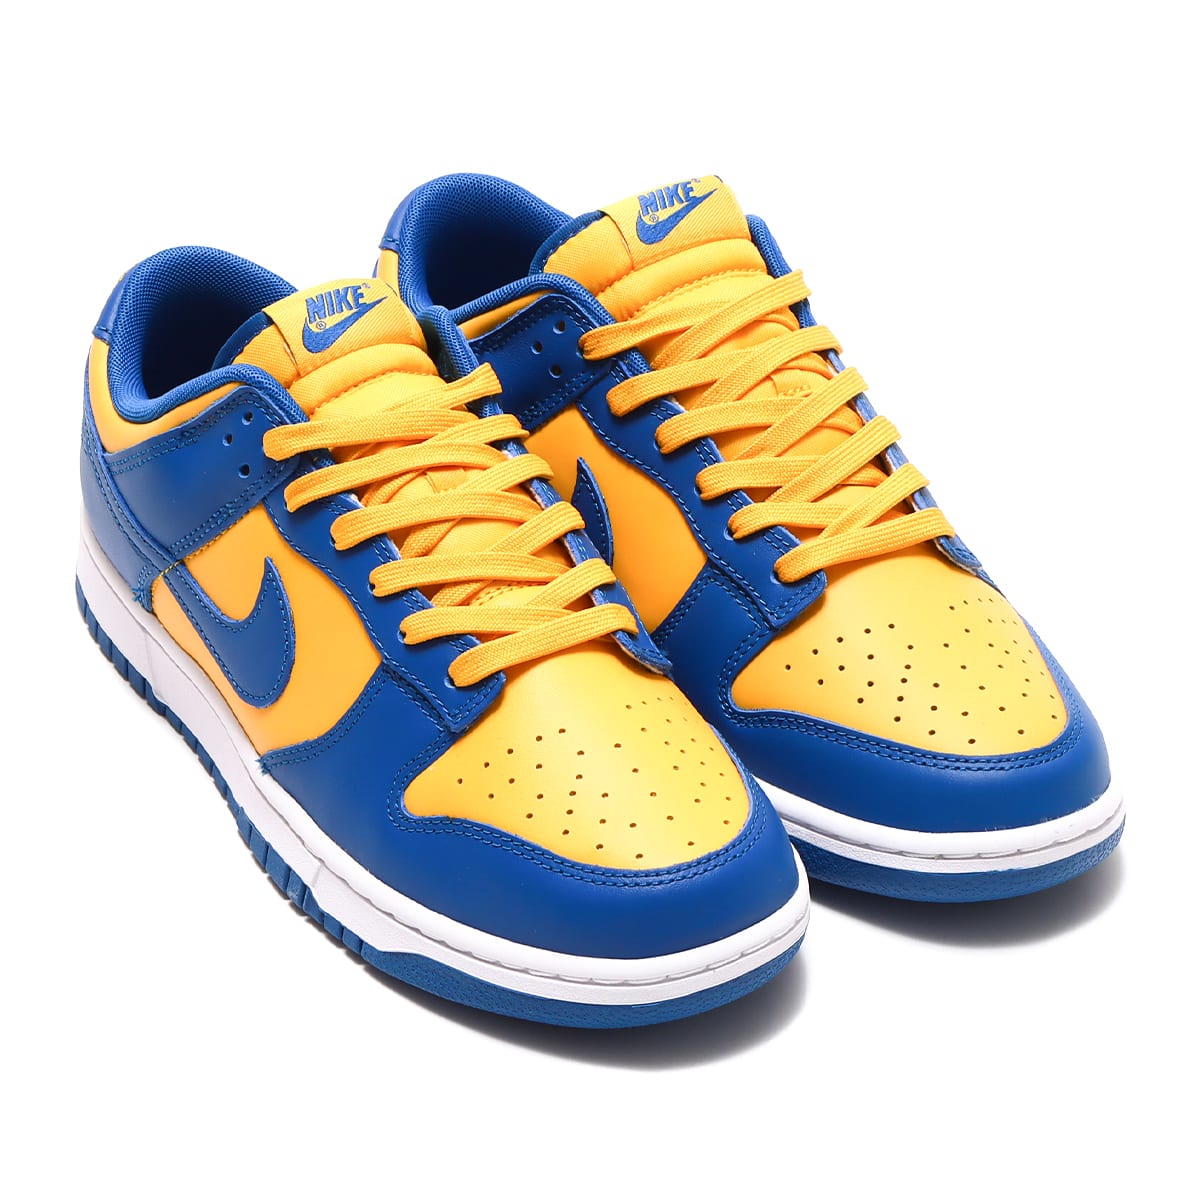 Nike Dunk Low "Blue Jay and University